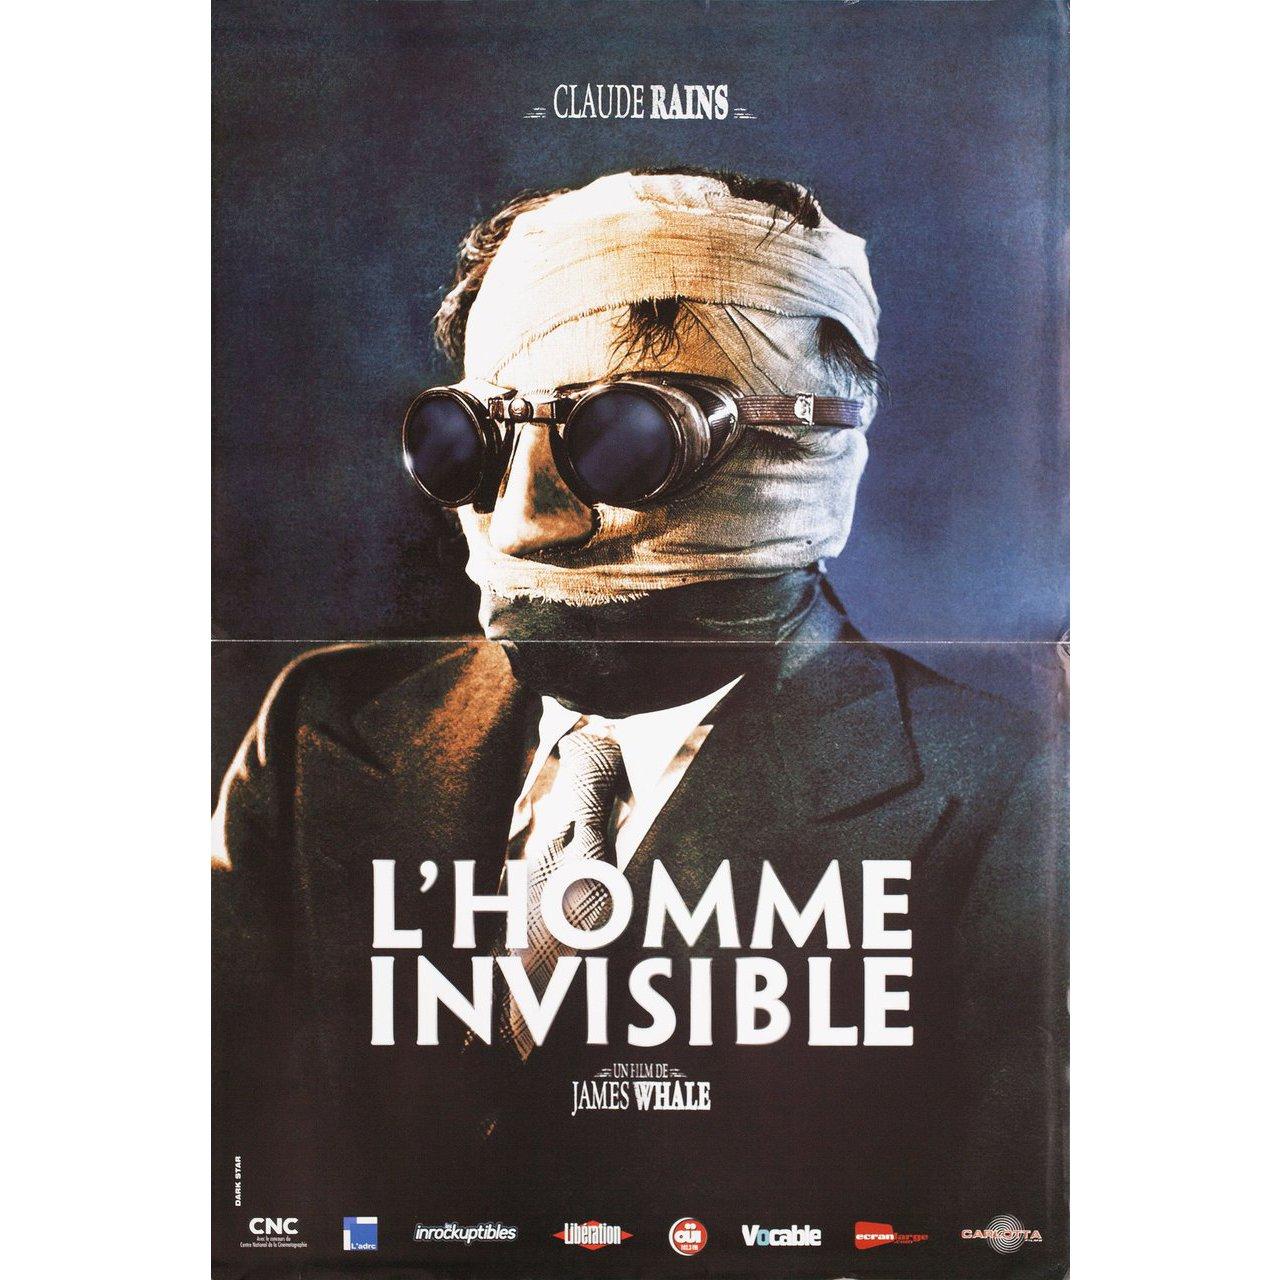 Original 2000s re-release French petite poster for the 1933 film The Invisible Man directed by James Whale with Claude Rains / Gloria Stuart / William Harrigan / Henry Travers. Very good-fine condition, folded. Many original posters were issued